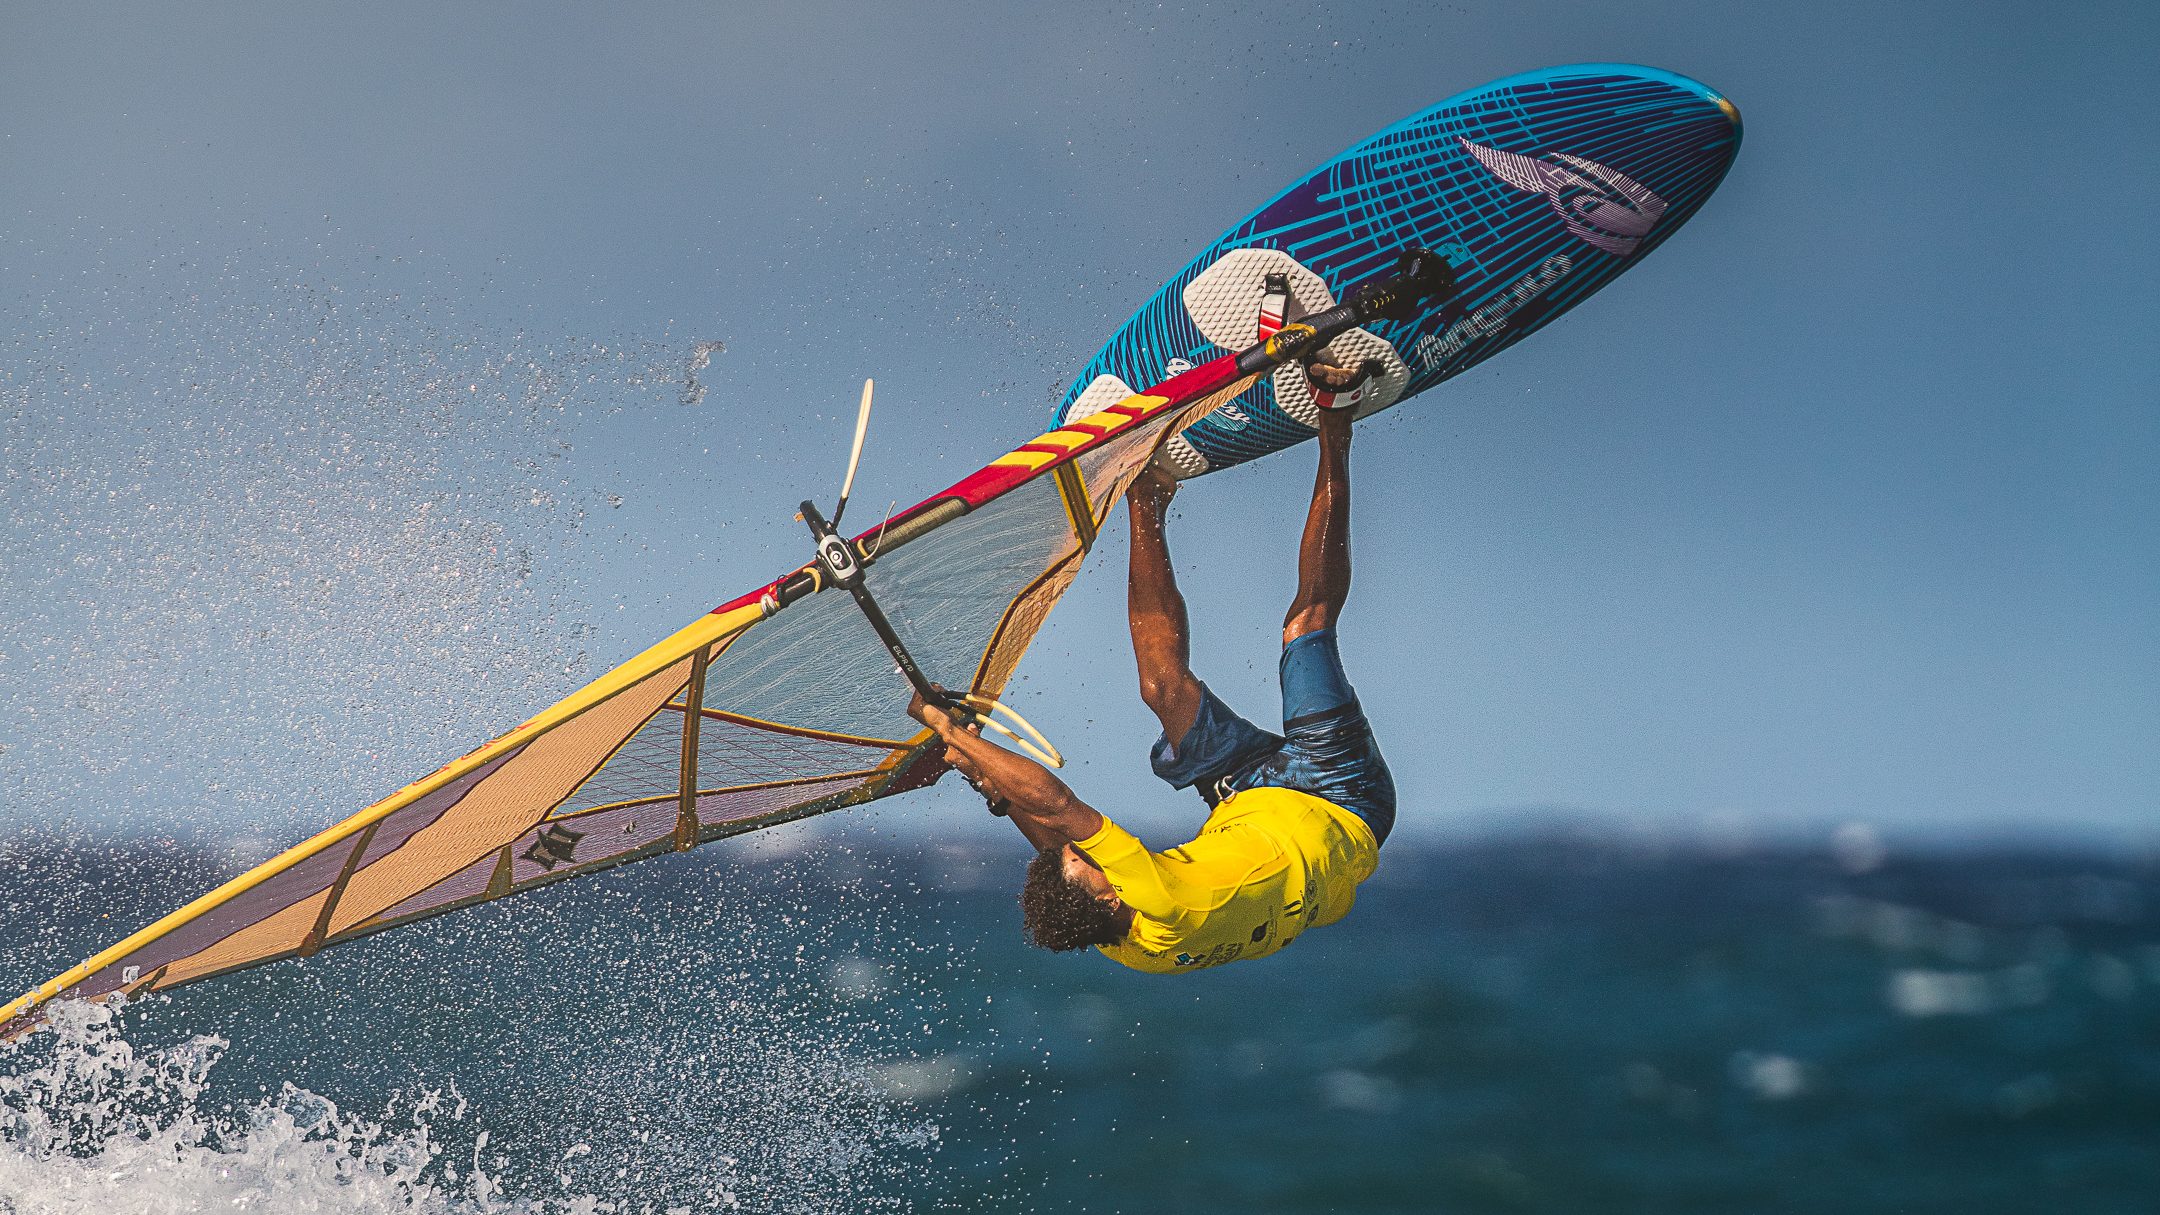 Master of the Ocean announces sustainable water sports championship in Cabarete